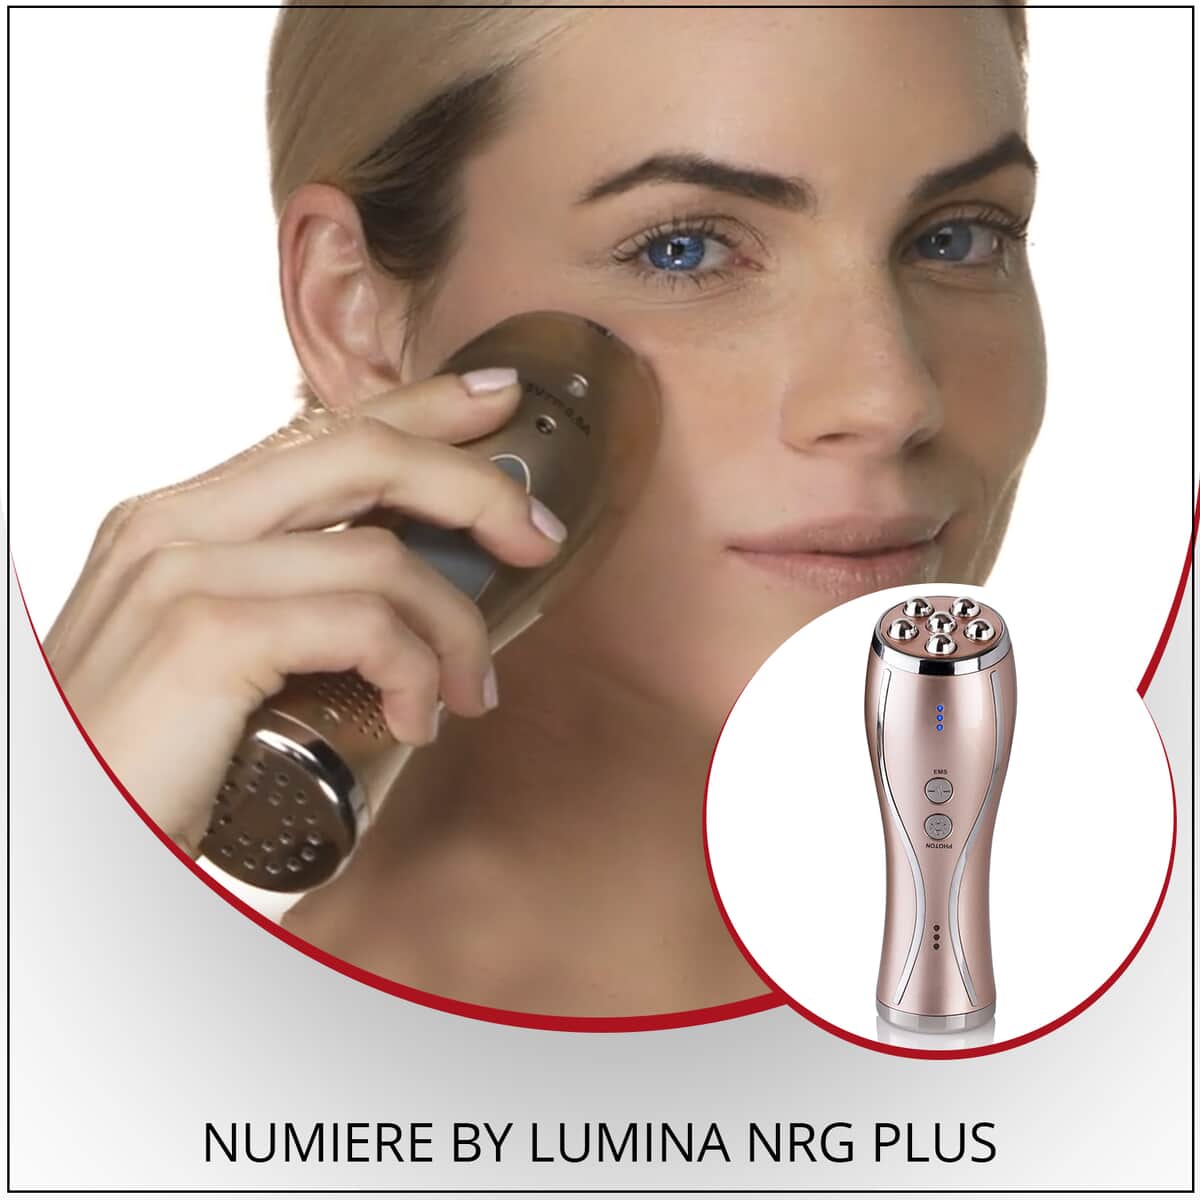 Numiere Plus 3 in 1 LED, Infrared Light, and Microcurrent Beauty Device image number 1